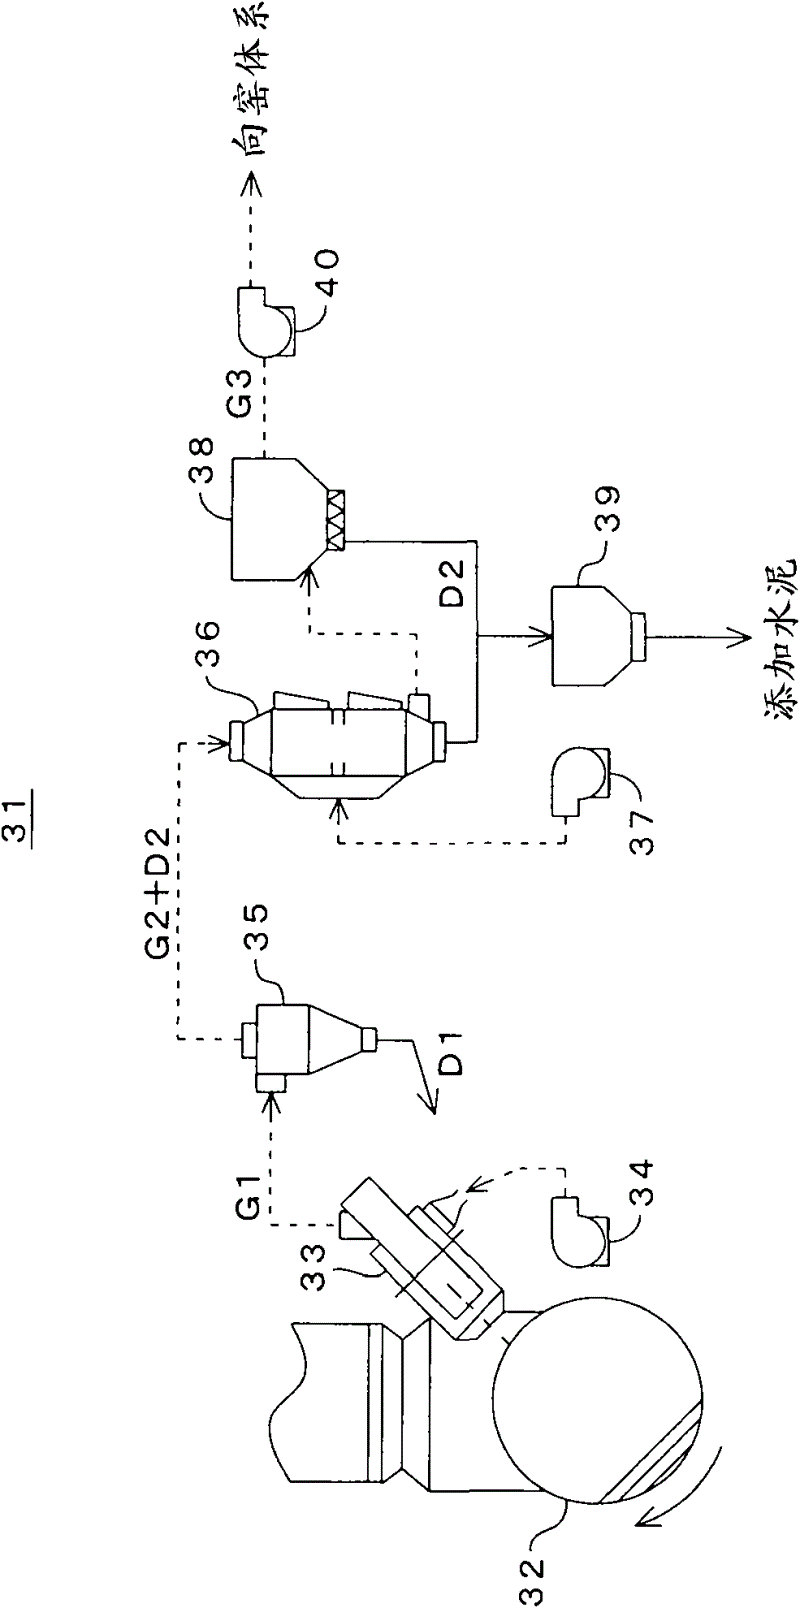 Chlorine bypass system and method for treating extracted gas from chlorine bypass